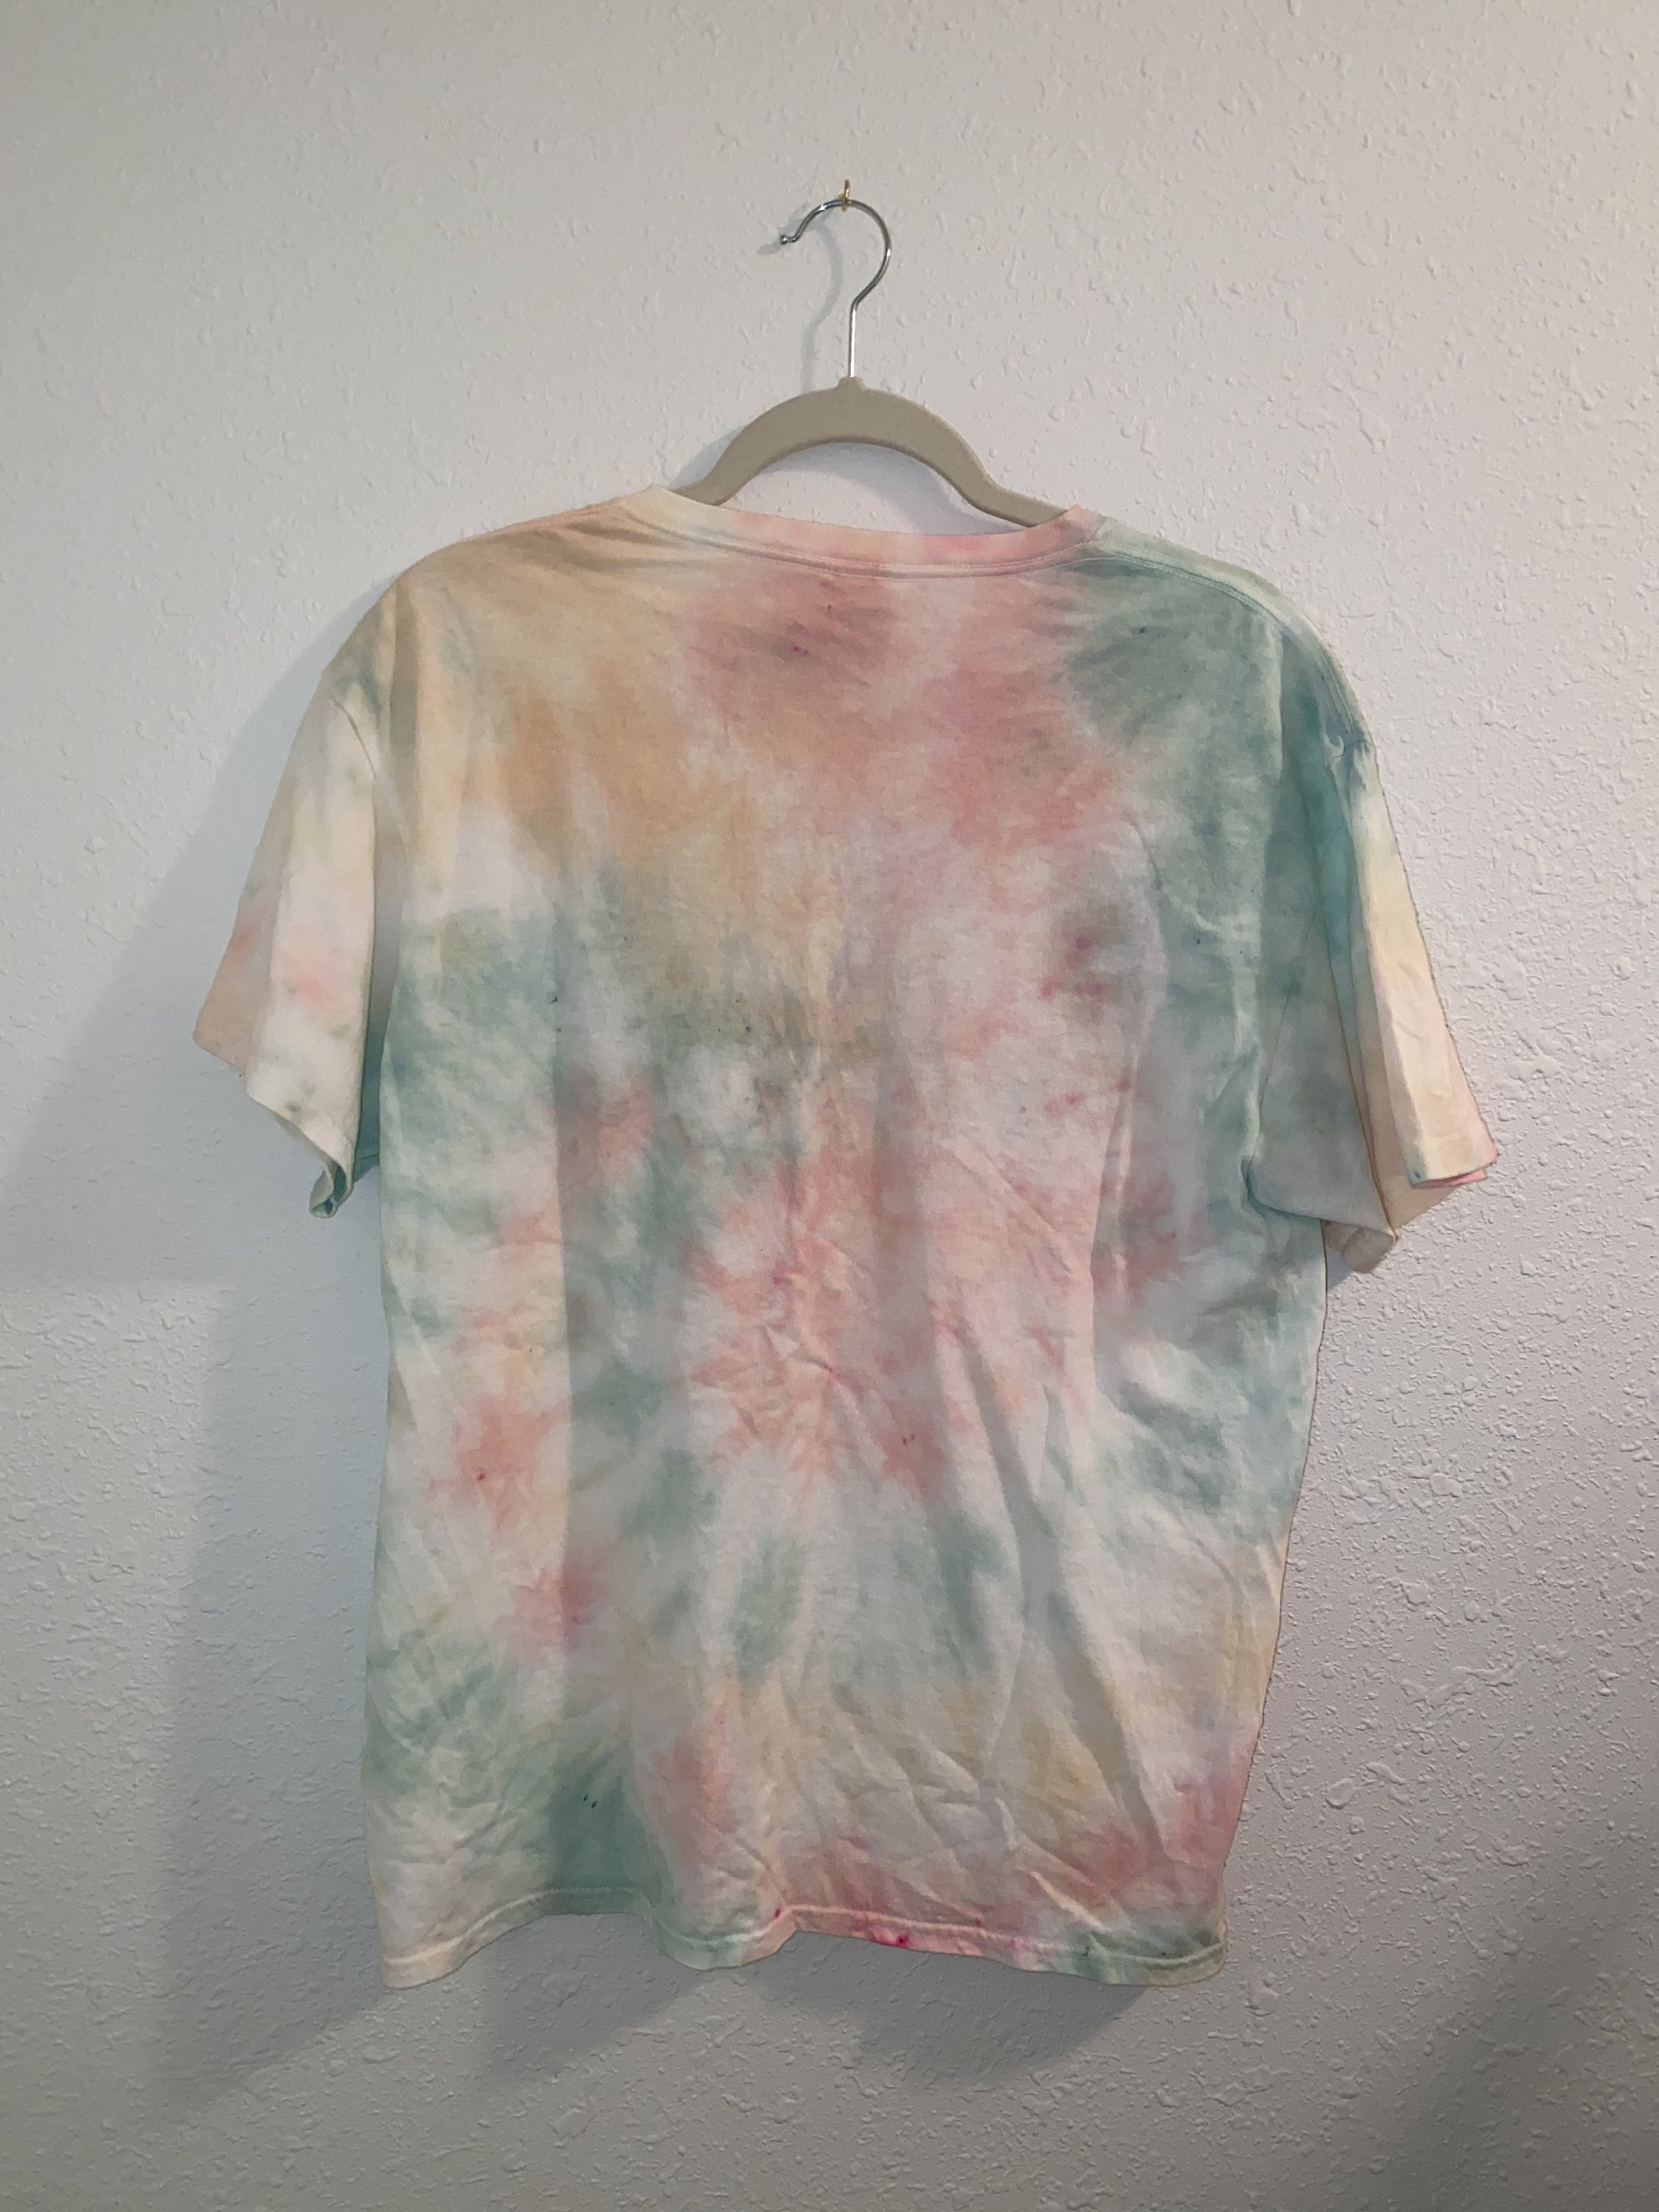 Florida Tie Dyed T-Shirt size L | Etsy